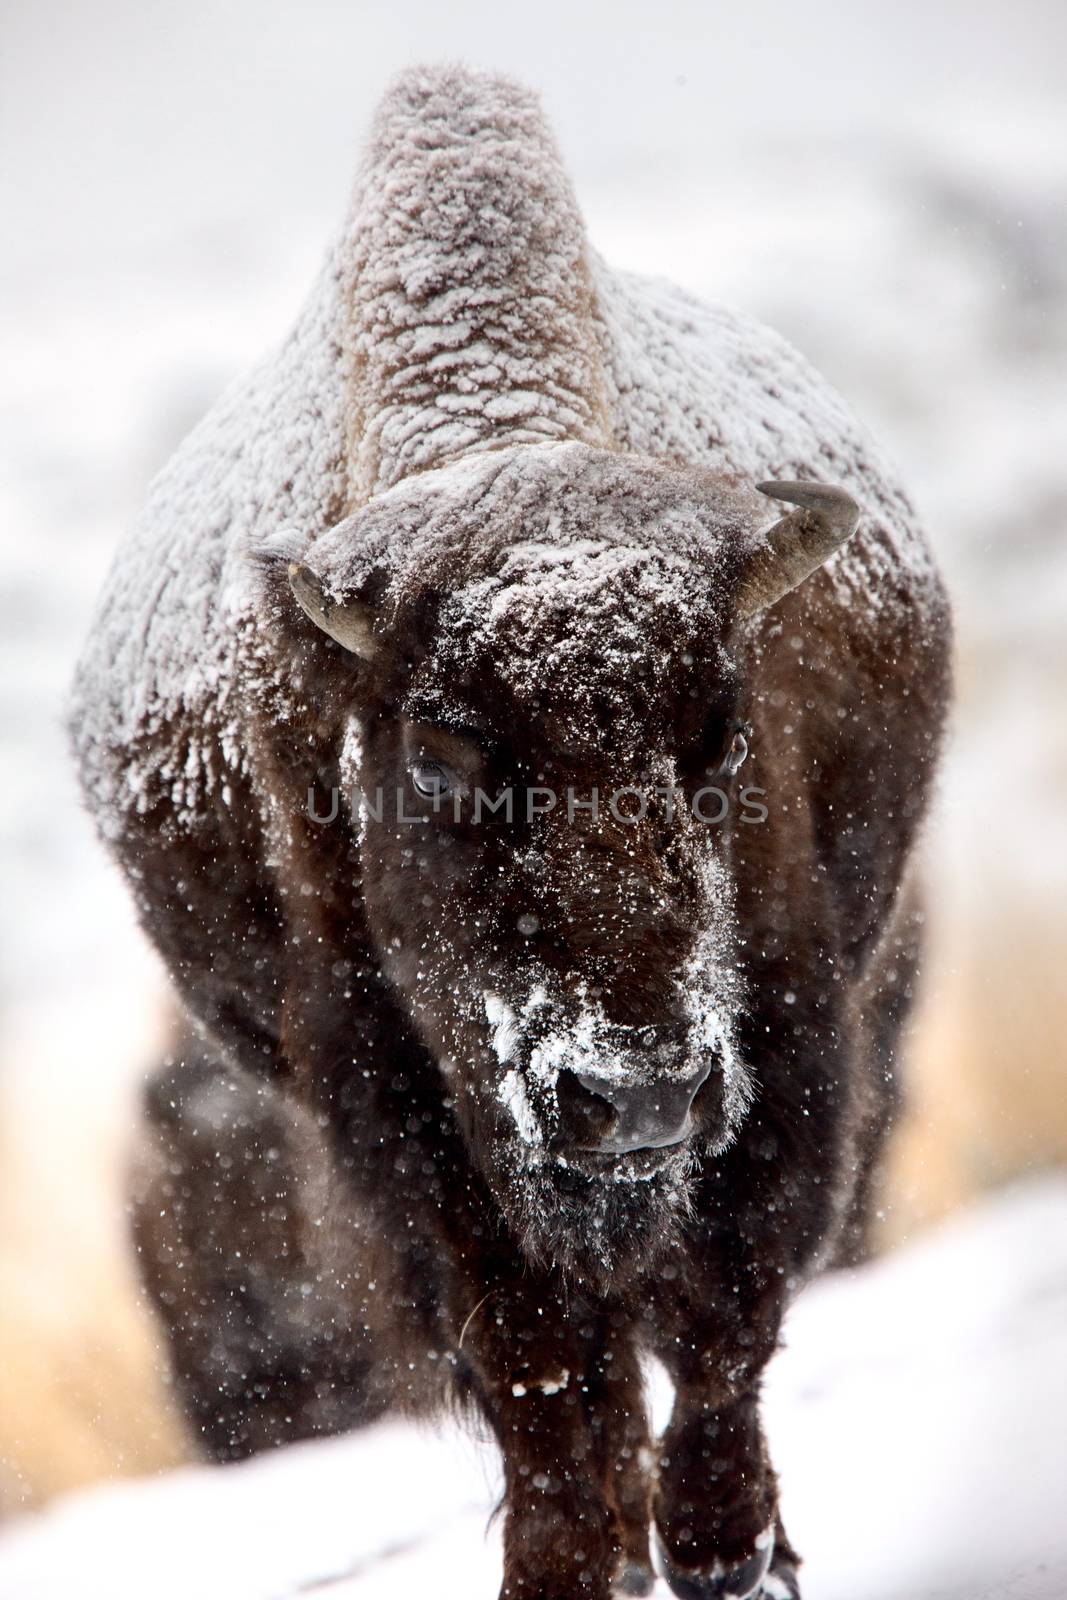 Bison Snow Storm blizzard cold Yellowstone USA